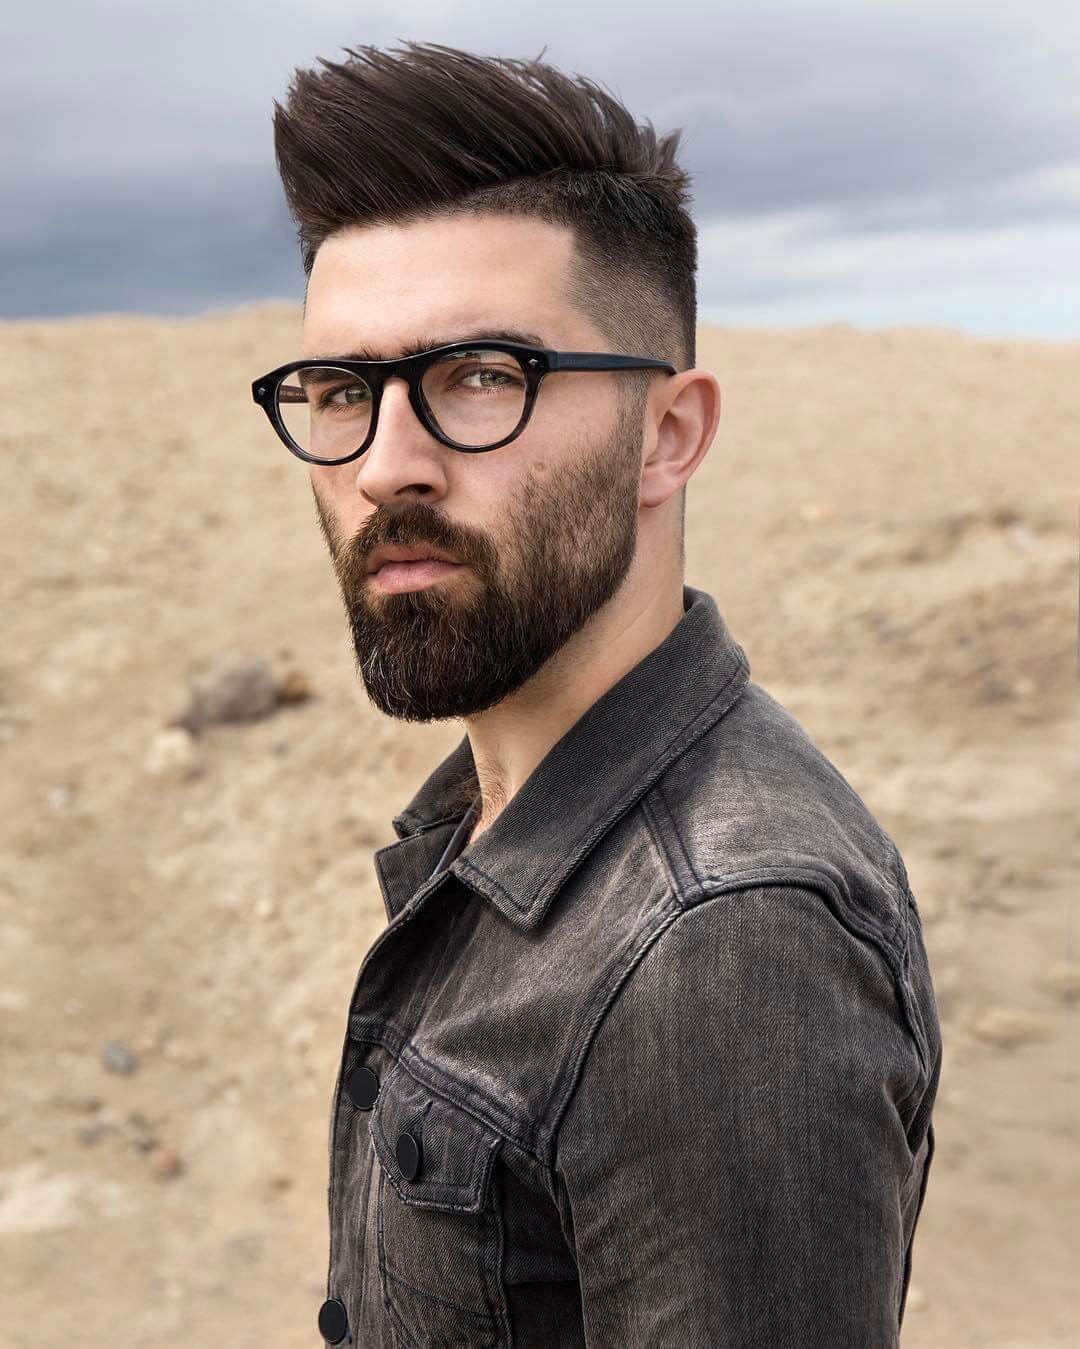 Mens Hairstyles With Glasses
 The Right Hair Beard and Glasses Styles According to